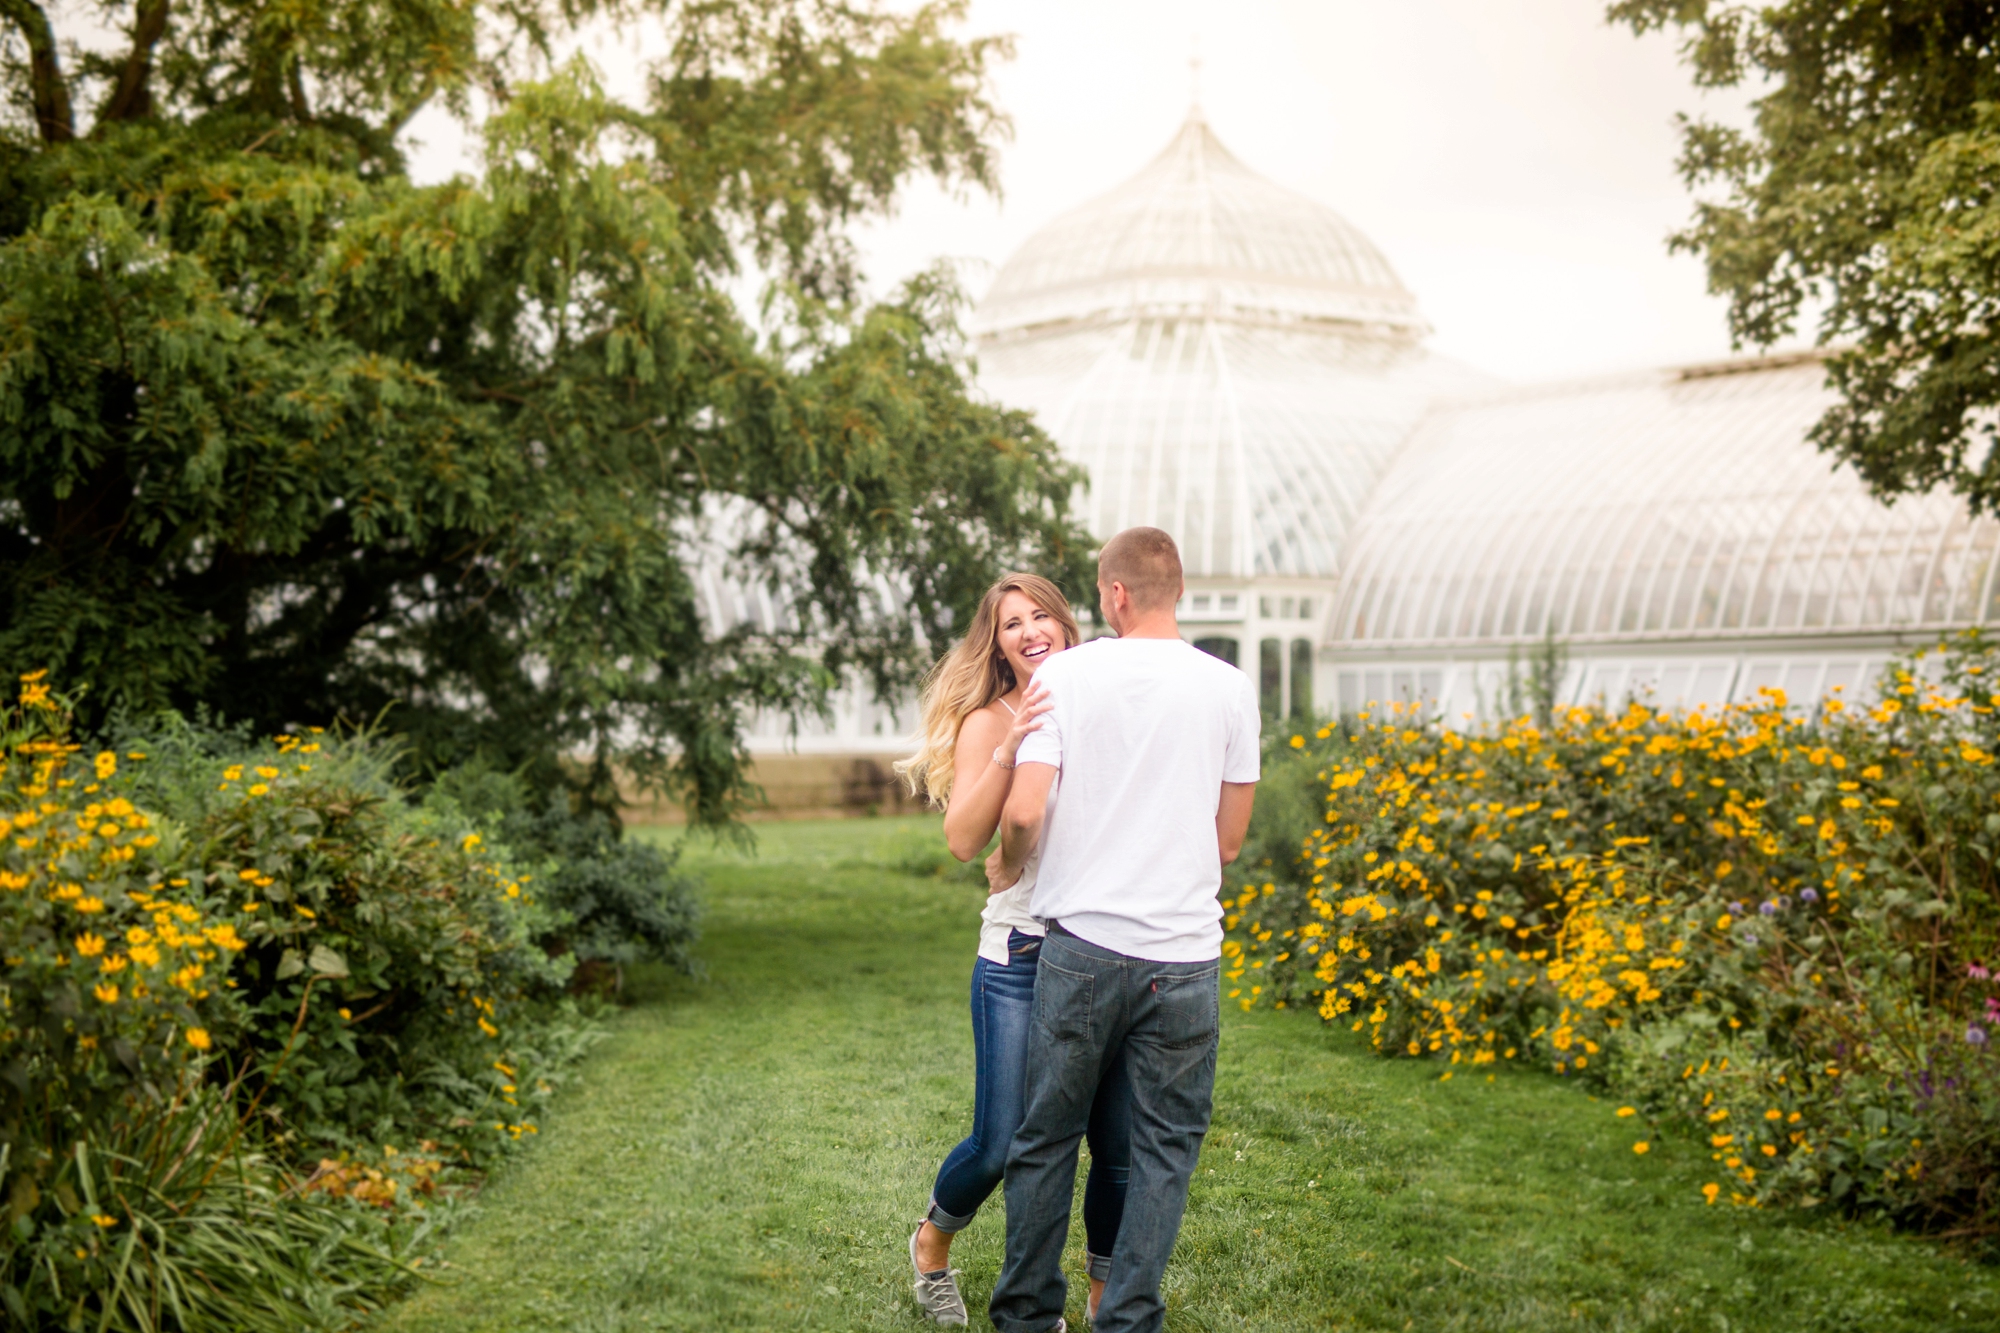 phipps conservatory engagement photos, phipps conservatory engagement photos, phipps conservatory wedding photos, phipps conservatory wedding photographer